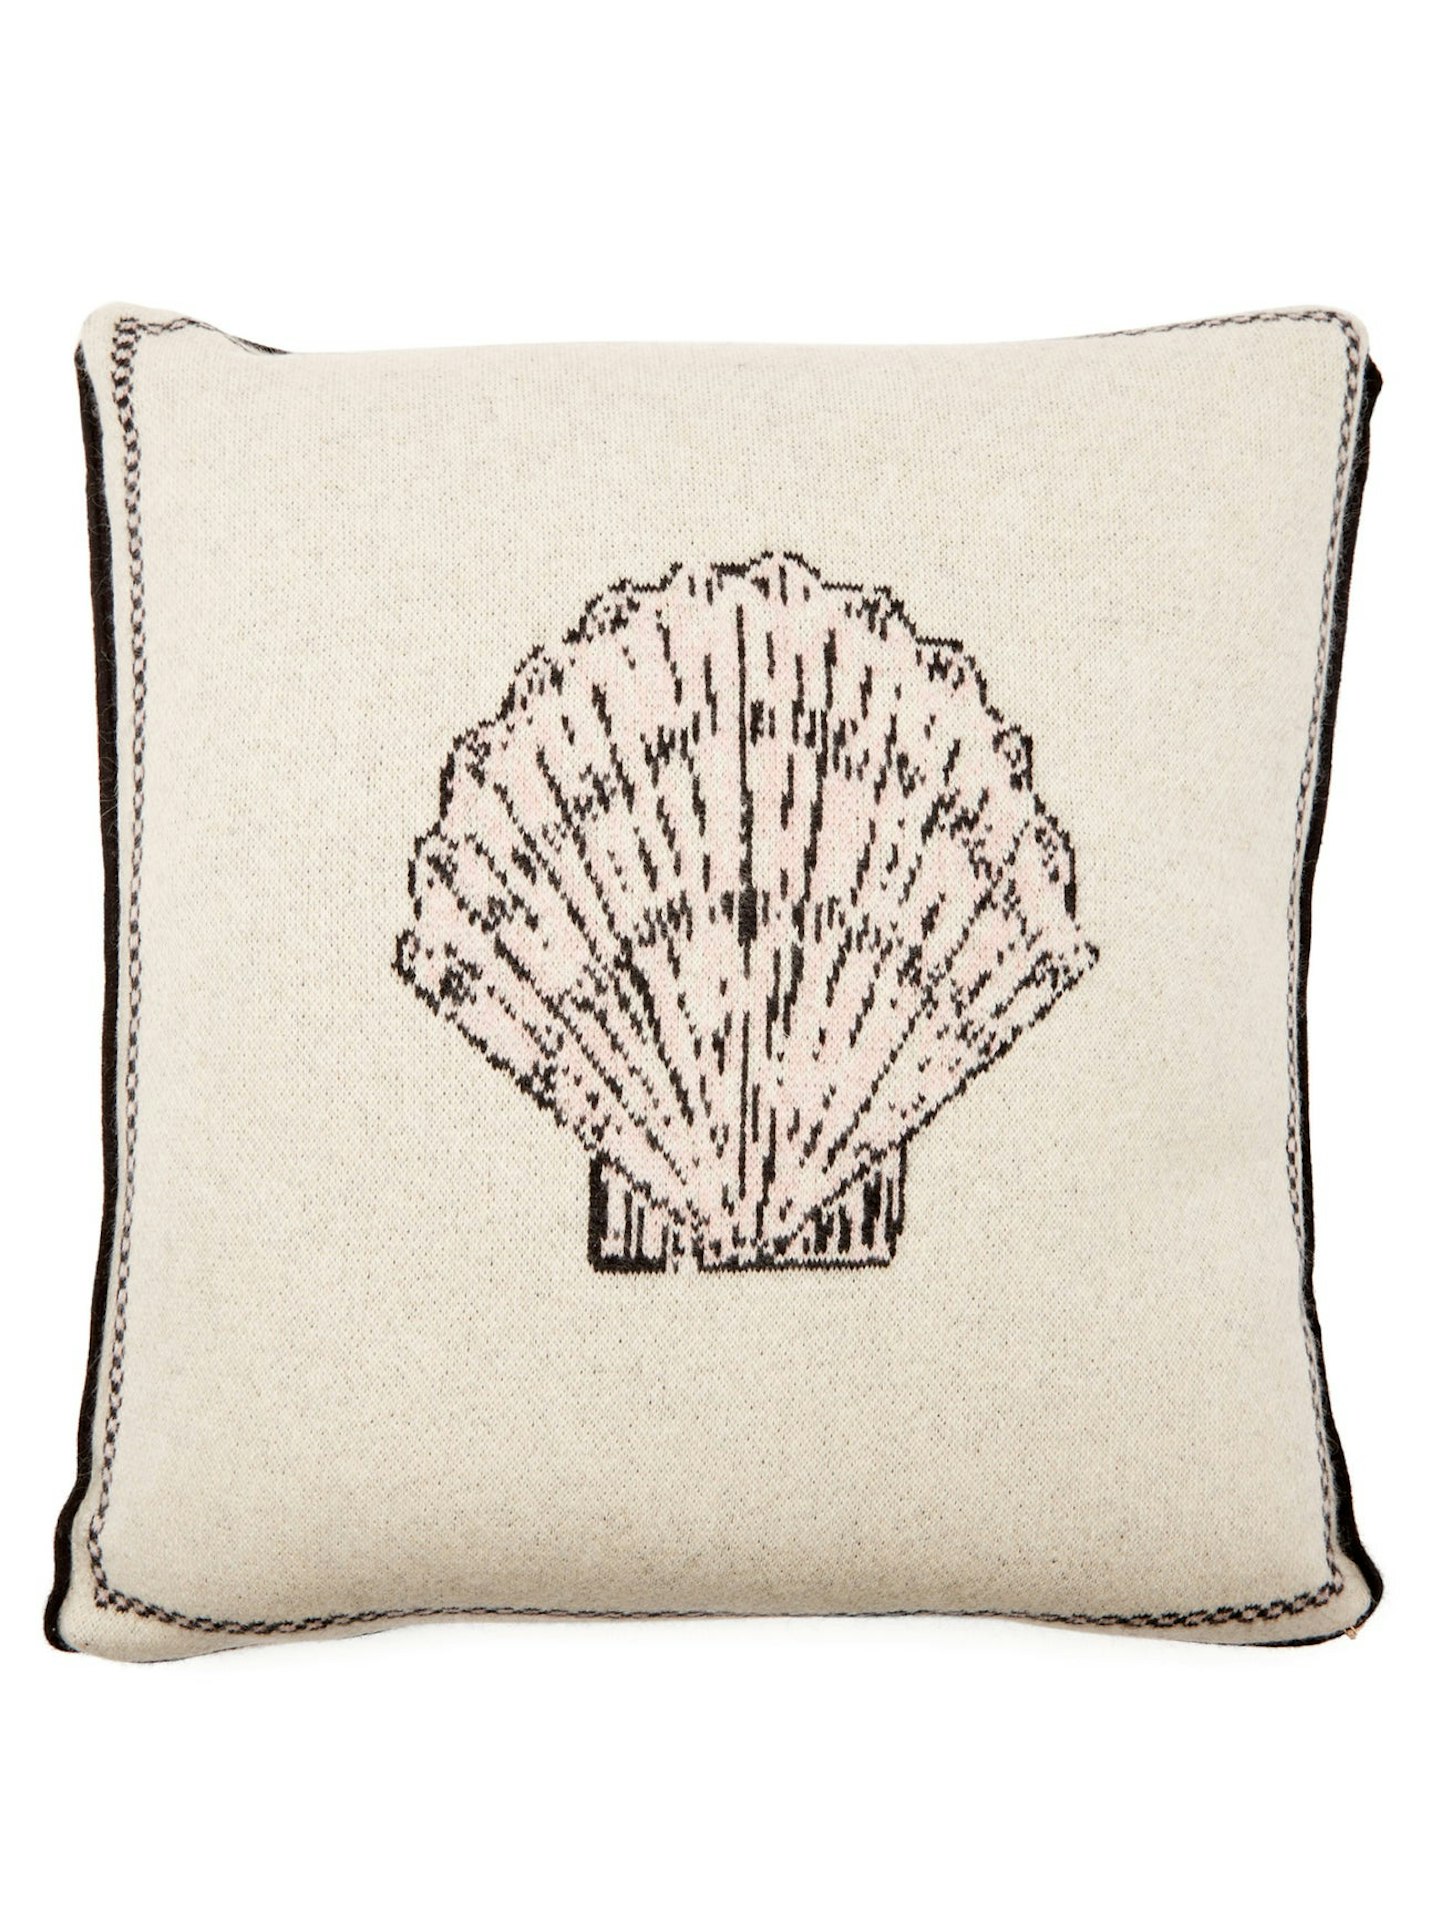 Saved NY X Fee Greening, Scallop Shell cashmere cushion, WAS £405 NOW £303.75